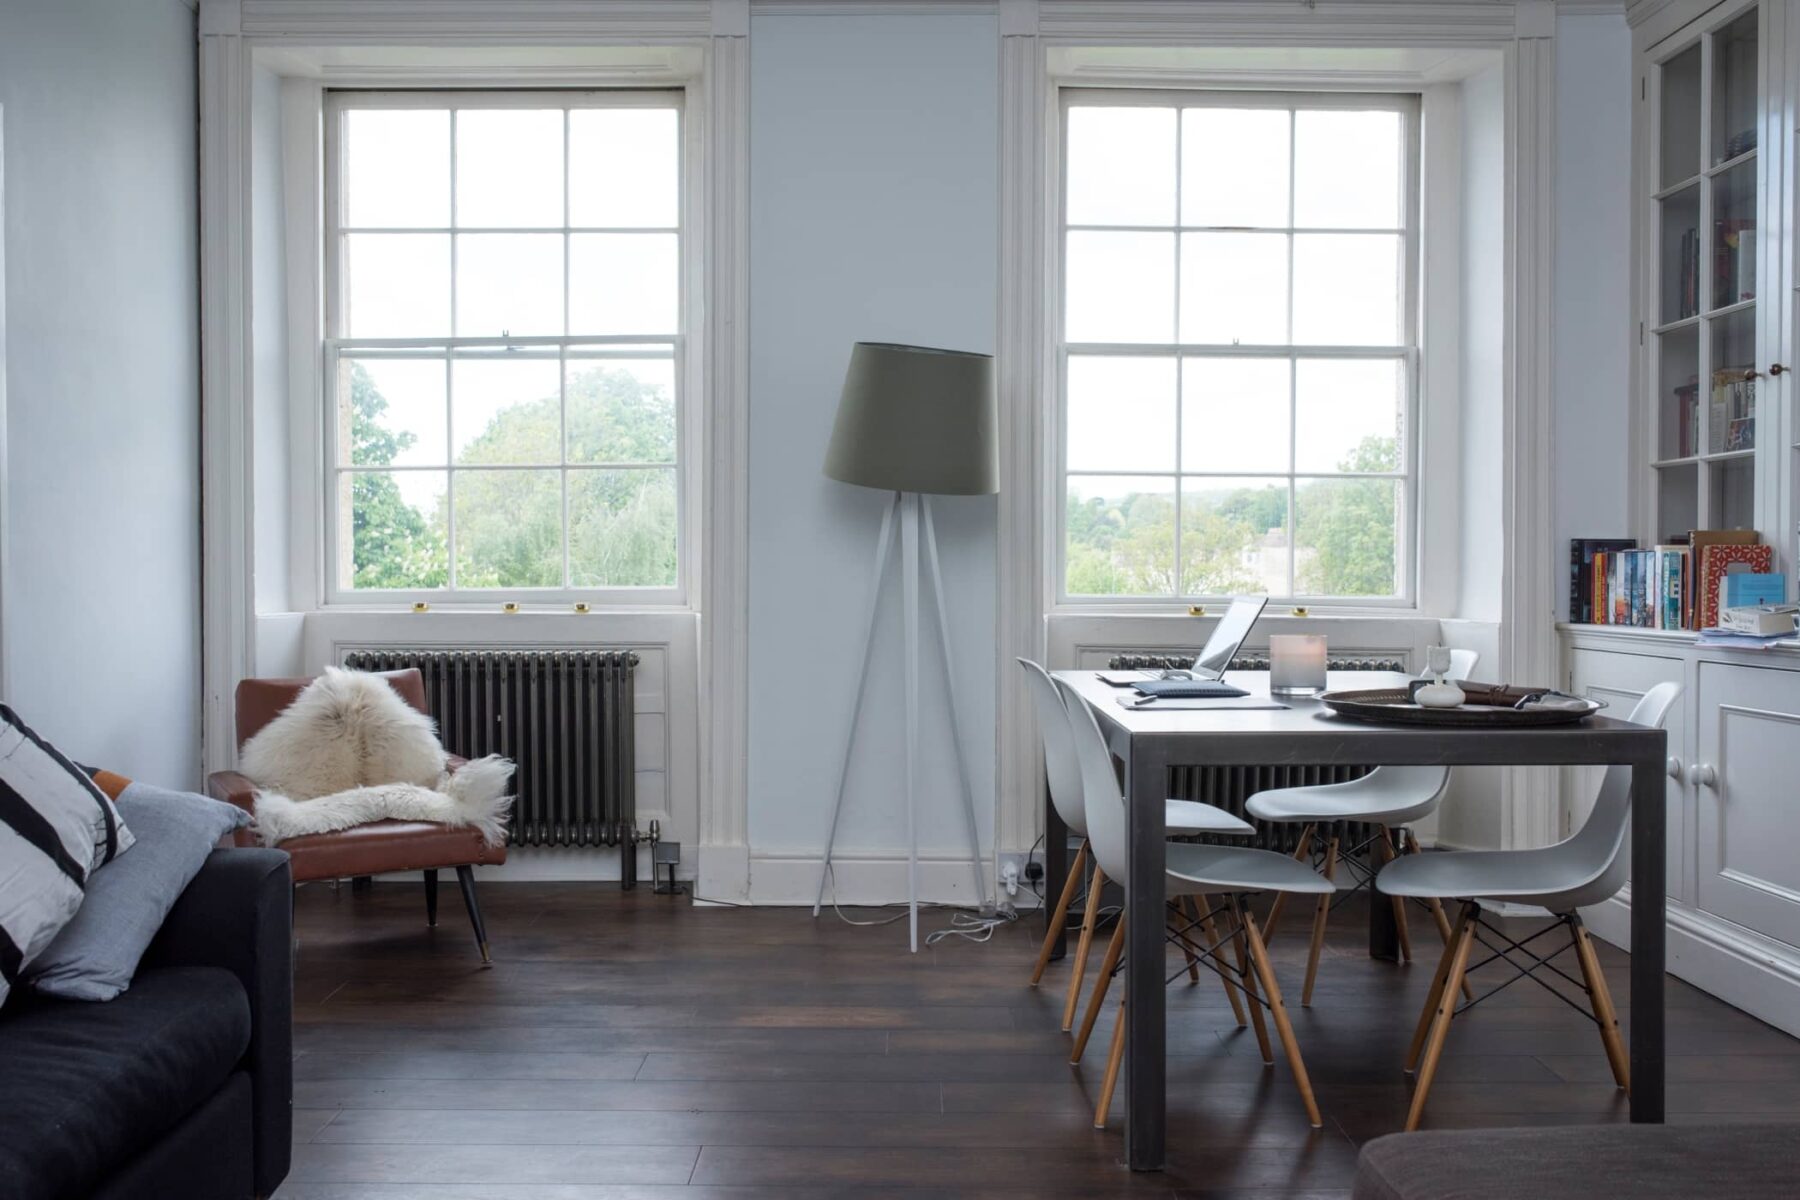 Large sash windows and contemporary furniture